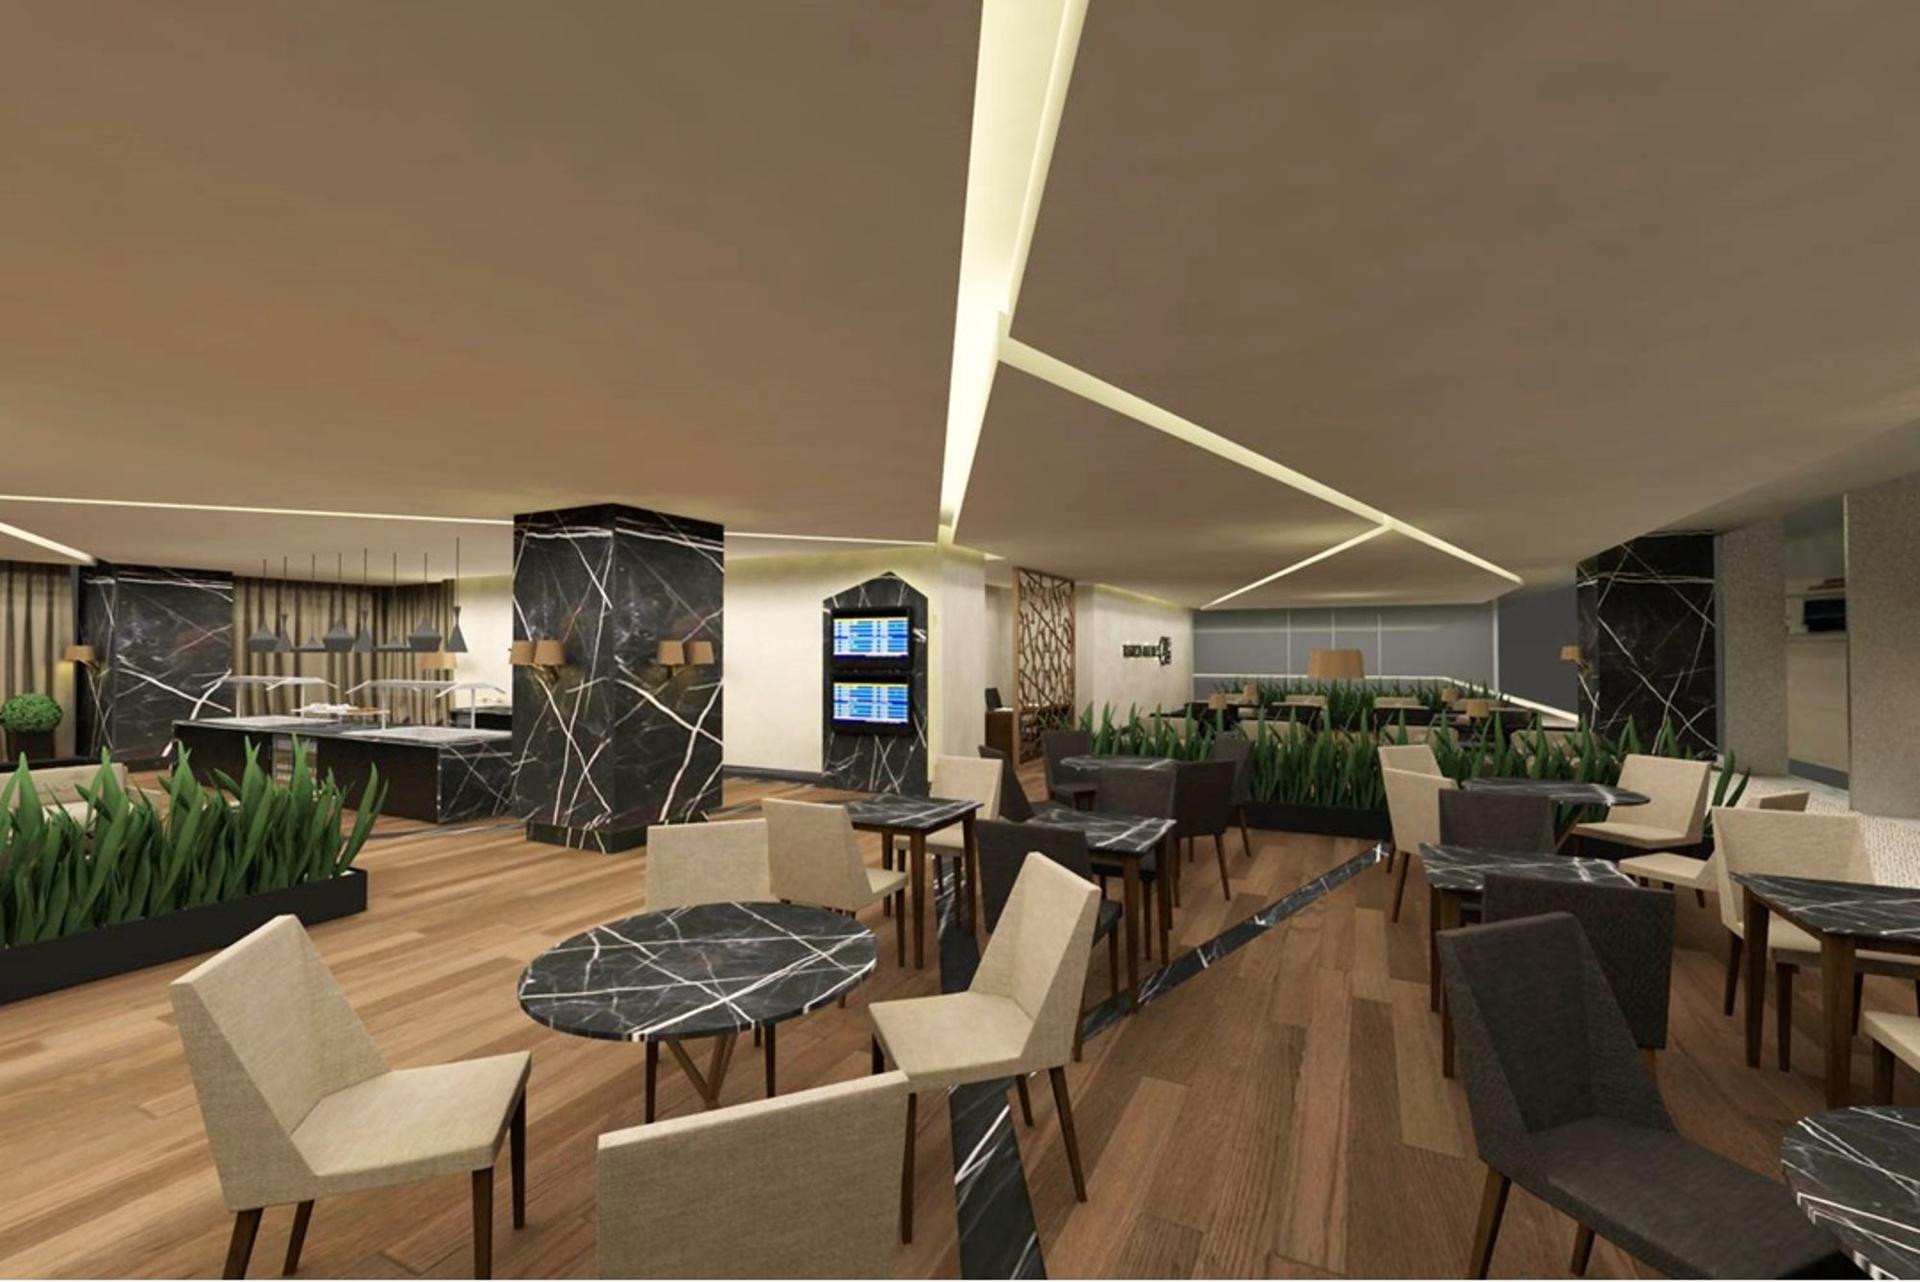 Turkish Airlines CIP Lounge (Business Lounge) image 14 of 27